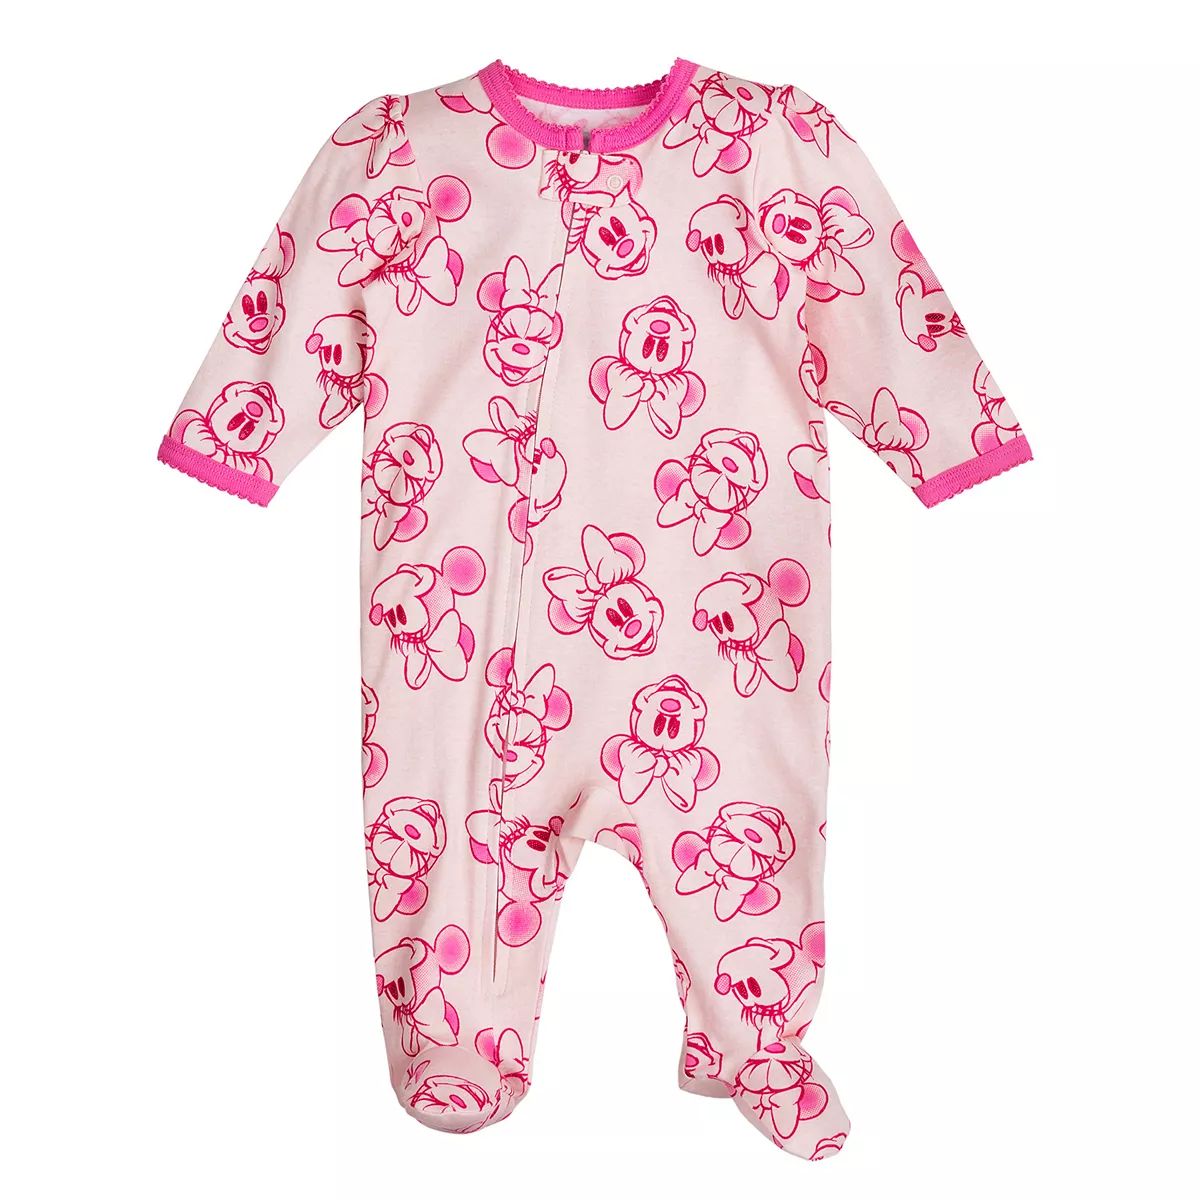 Disney's Minnie Mouse Baby Girl Footed Pajamas | Kohl's